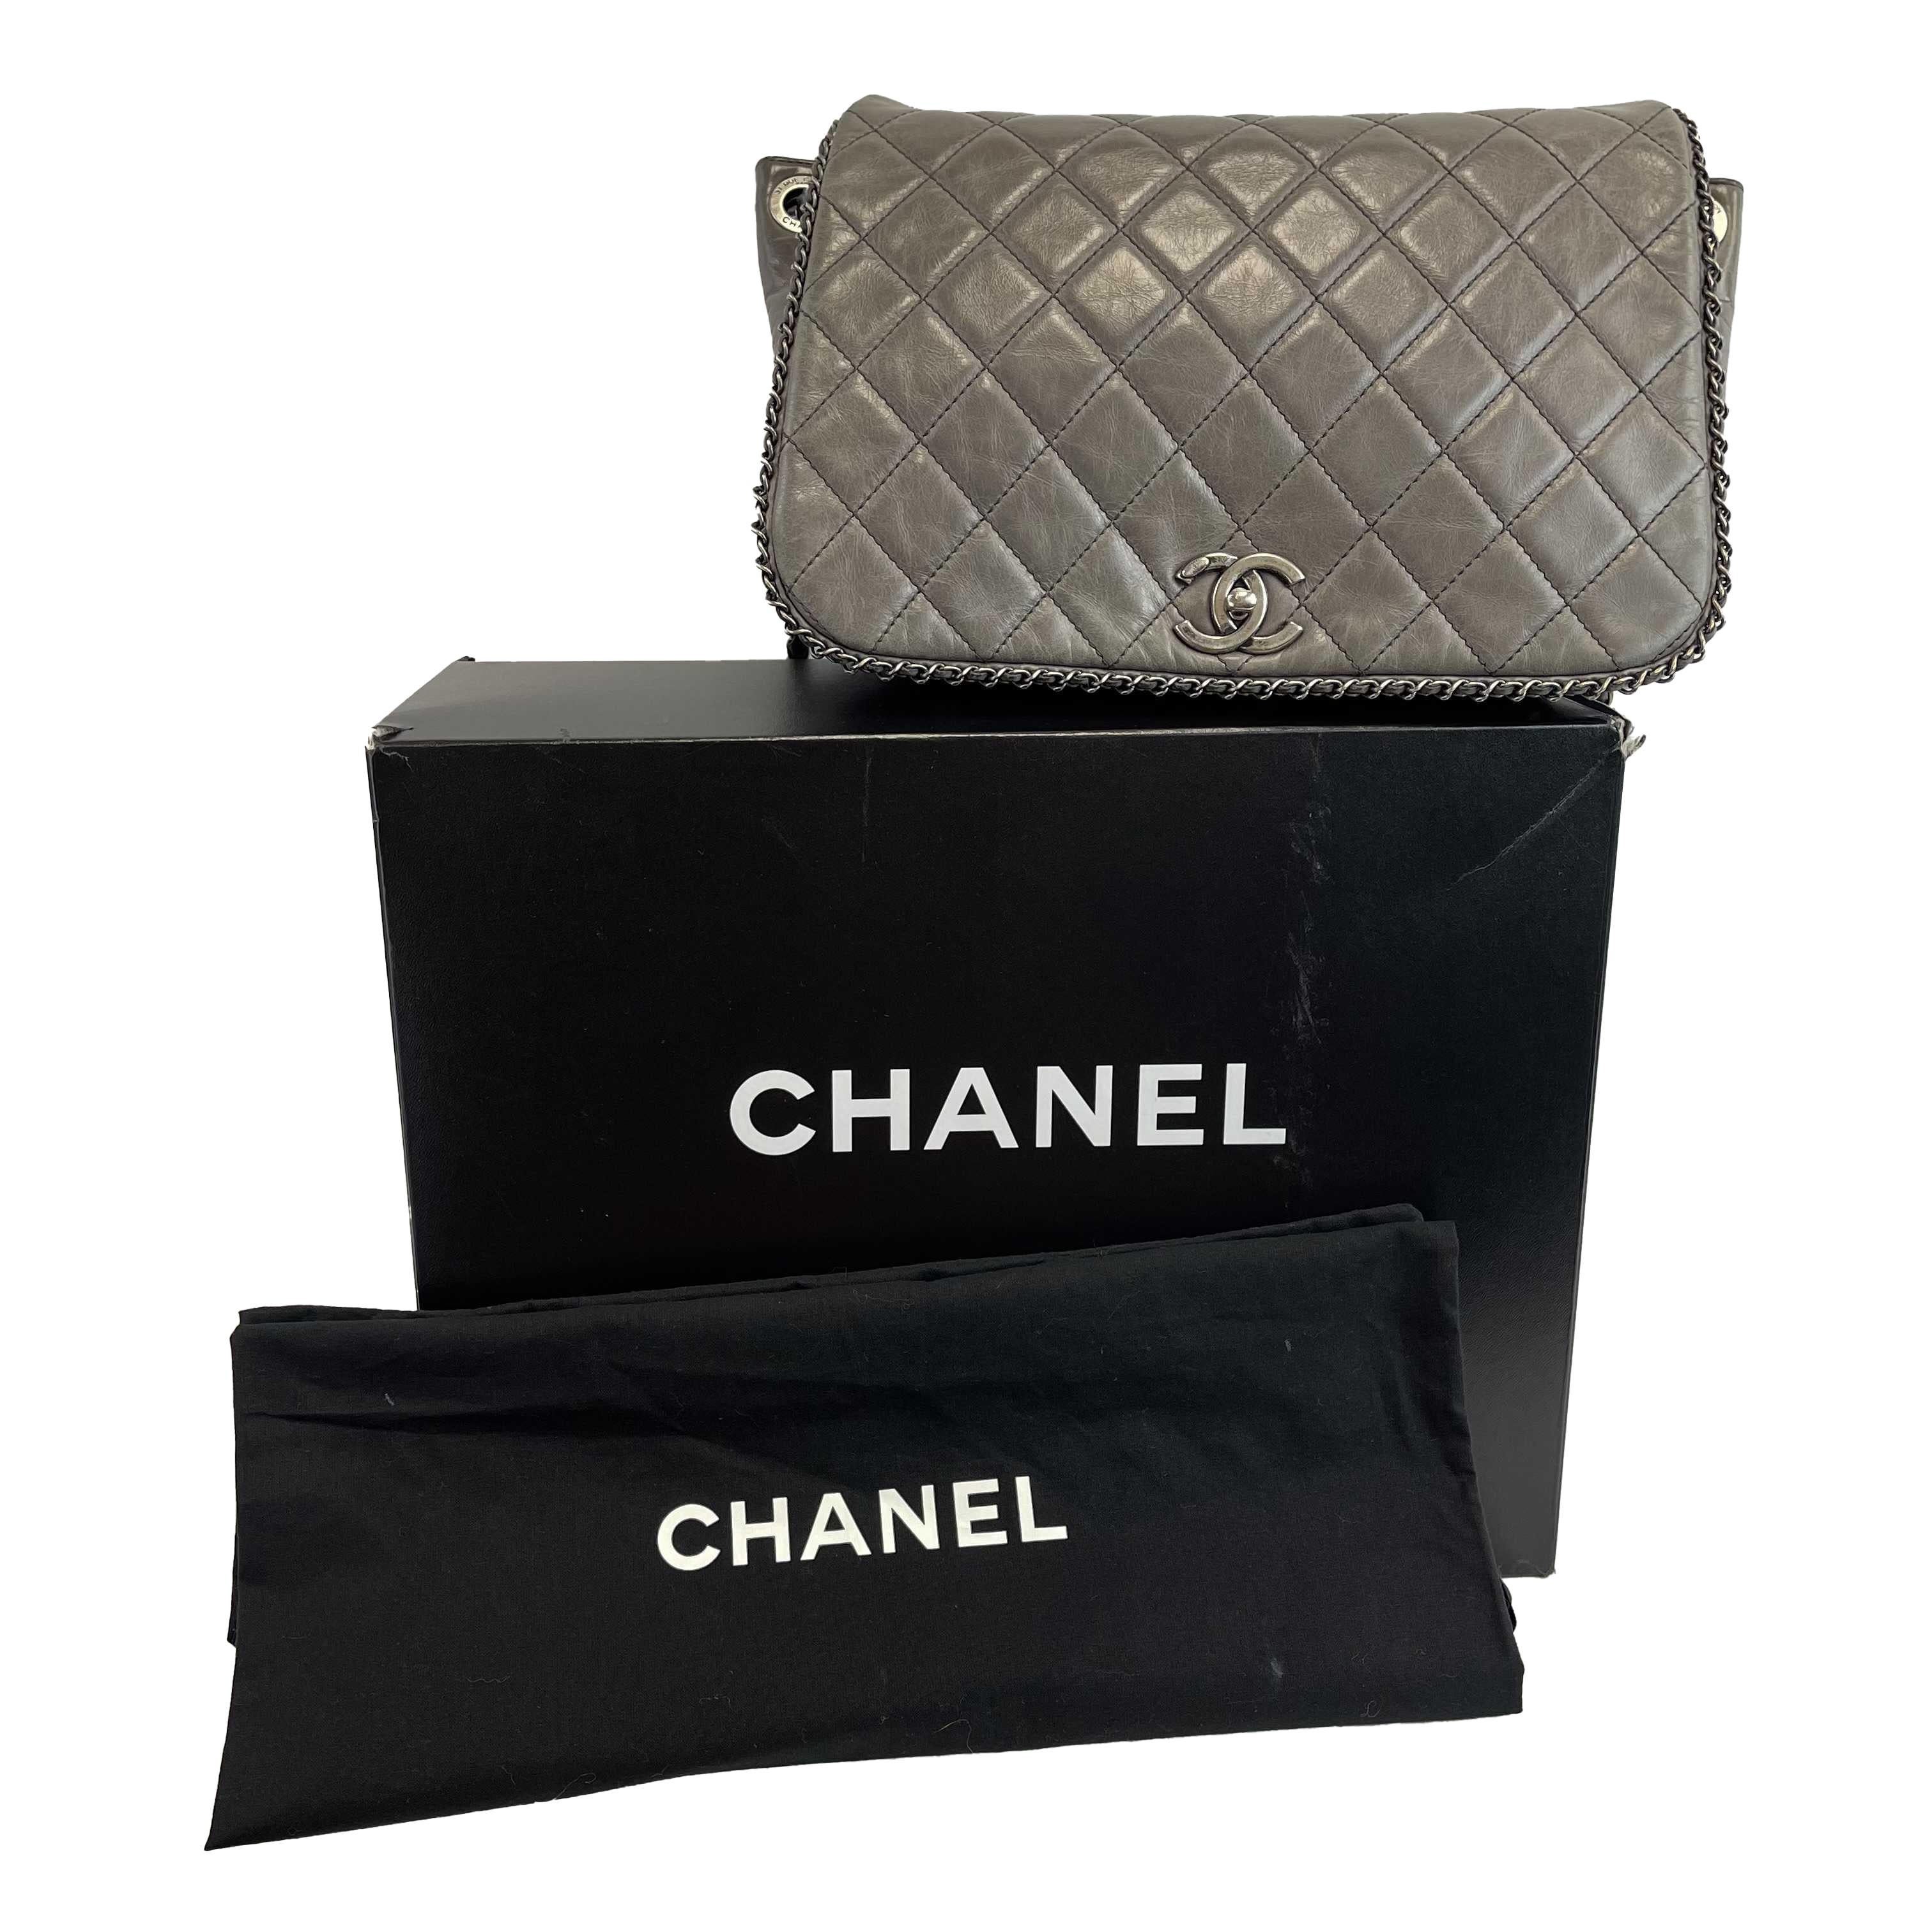 CHANEL - Calfskin Quilted Large CC Enchained Accordion - Gray Shoulder Bag In Good Condition For Sale In Sanford, FL